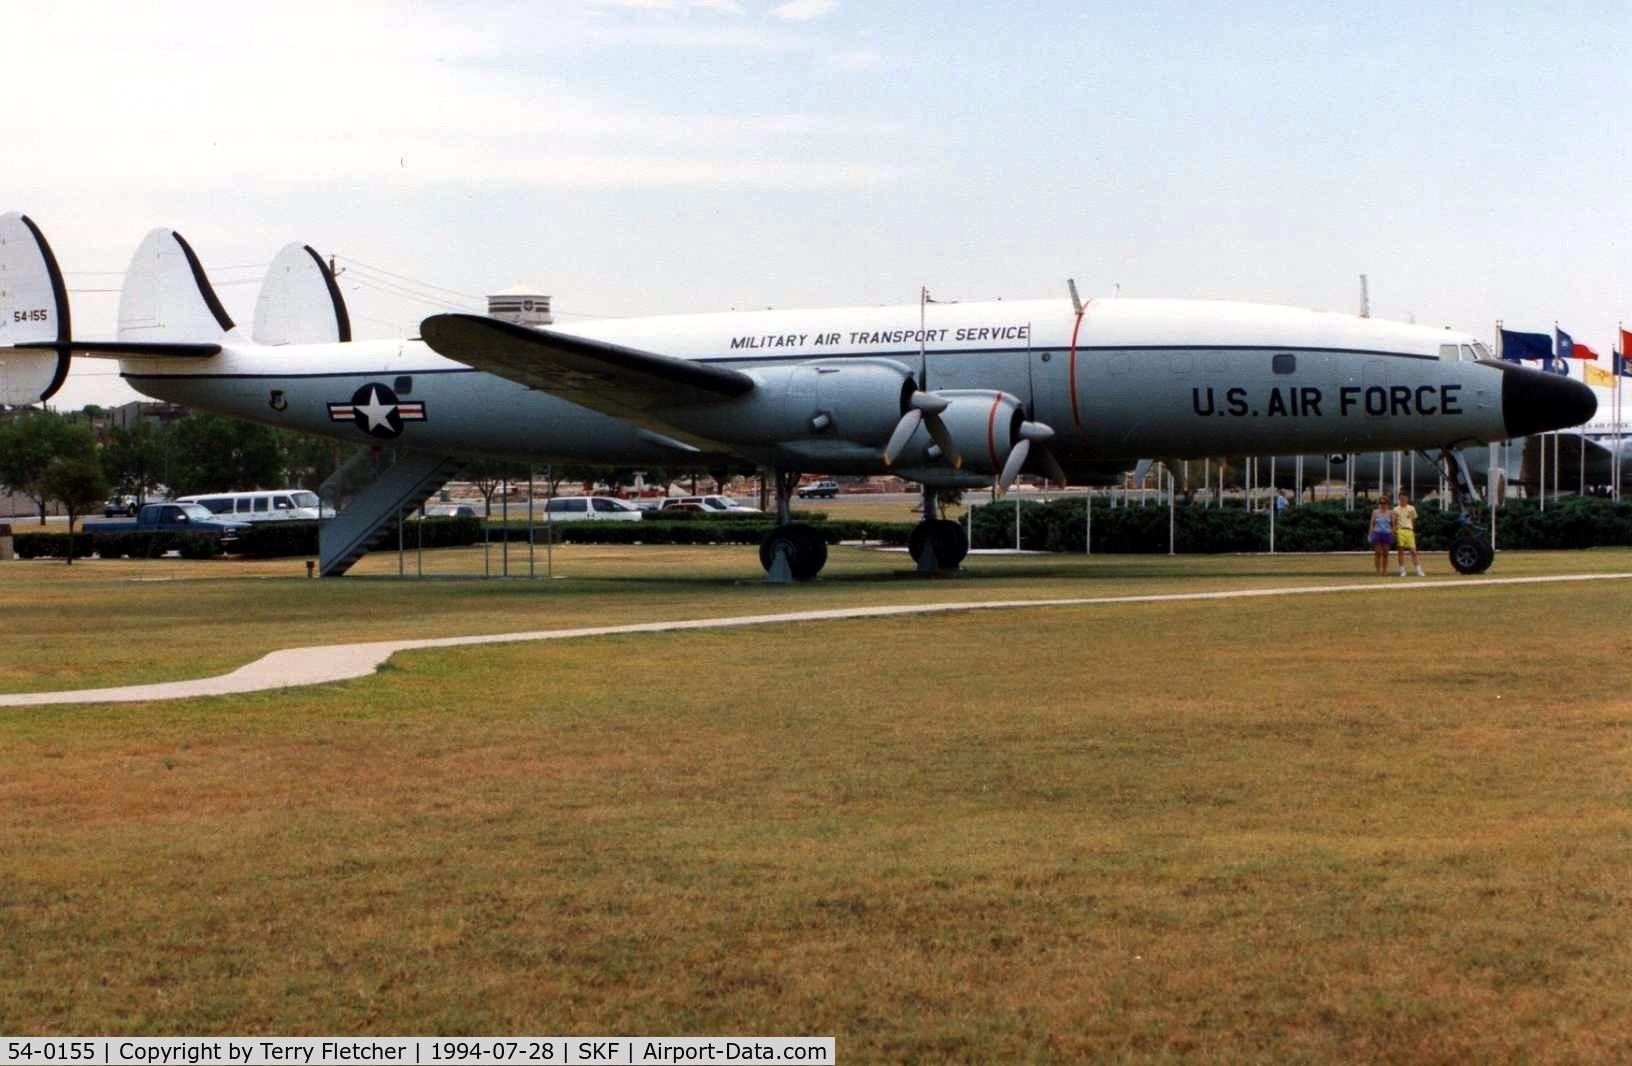 54-0155, Lockheed EC-121S Warning Star C/N 1049F-4174, One of only six EC-121S built by Lockheed - this aircraft is preserved at Lackland AFB Museum in Texas